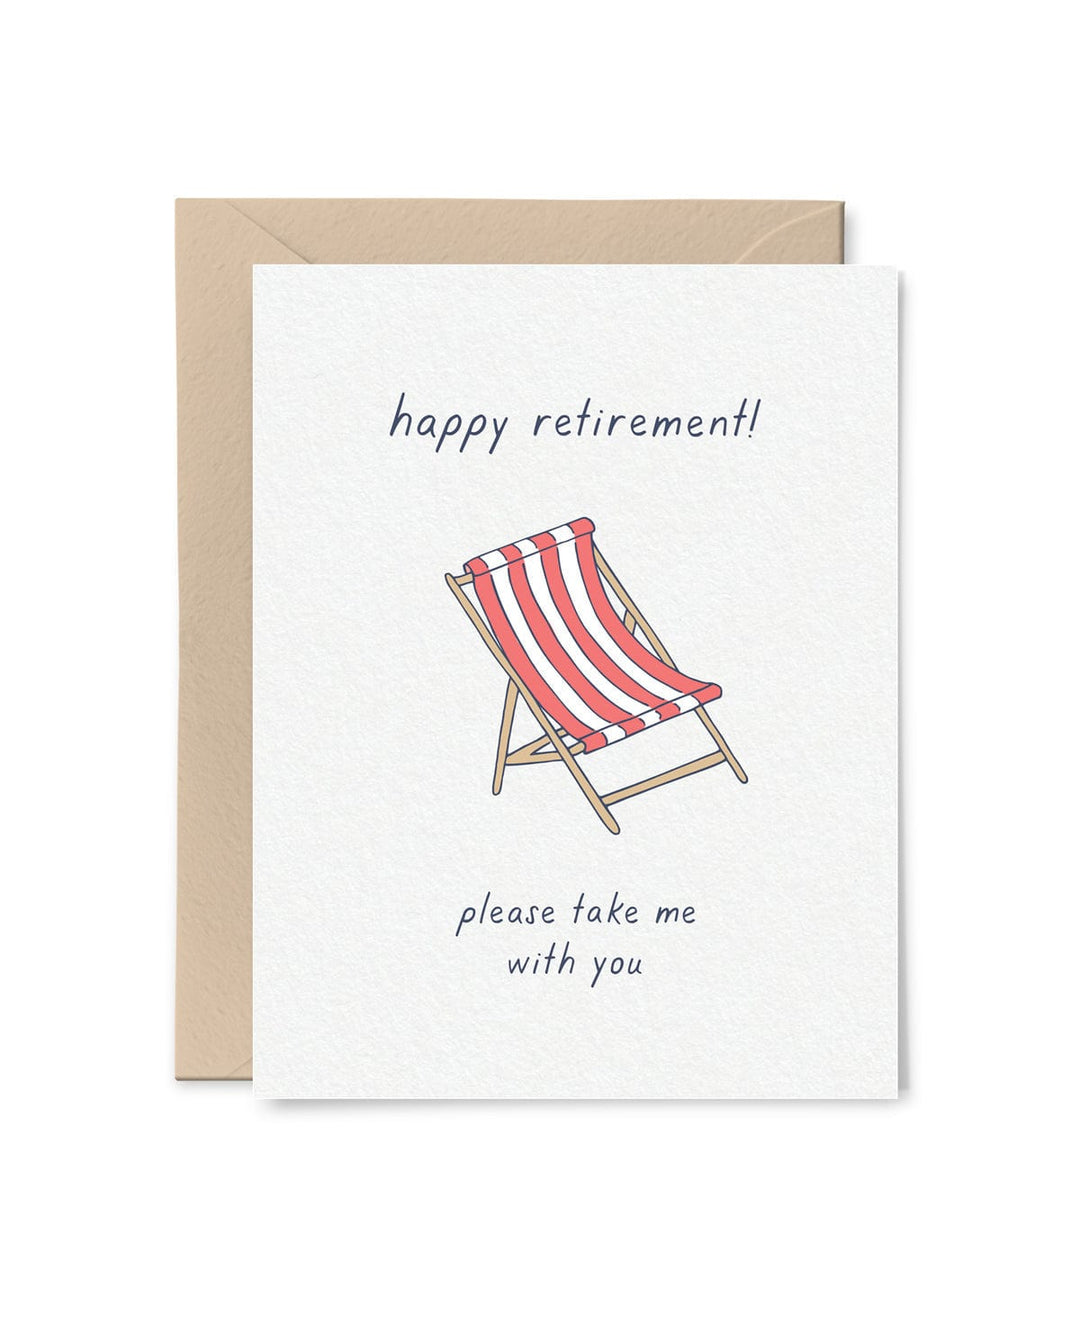 Tiny Hooray Card Take Me With You Retirement Card